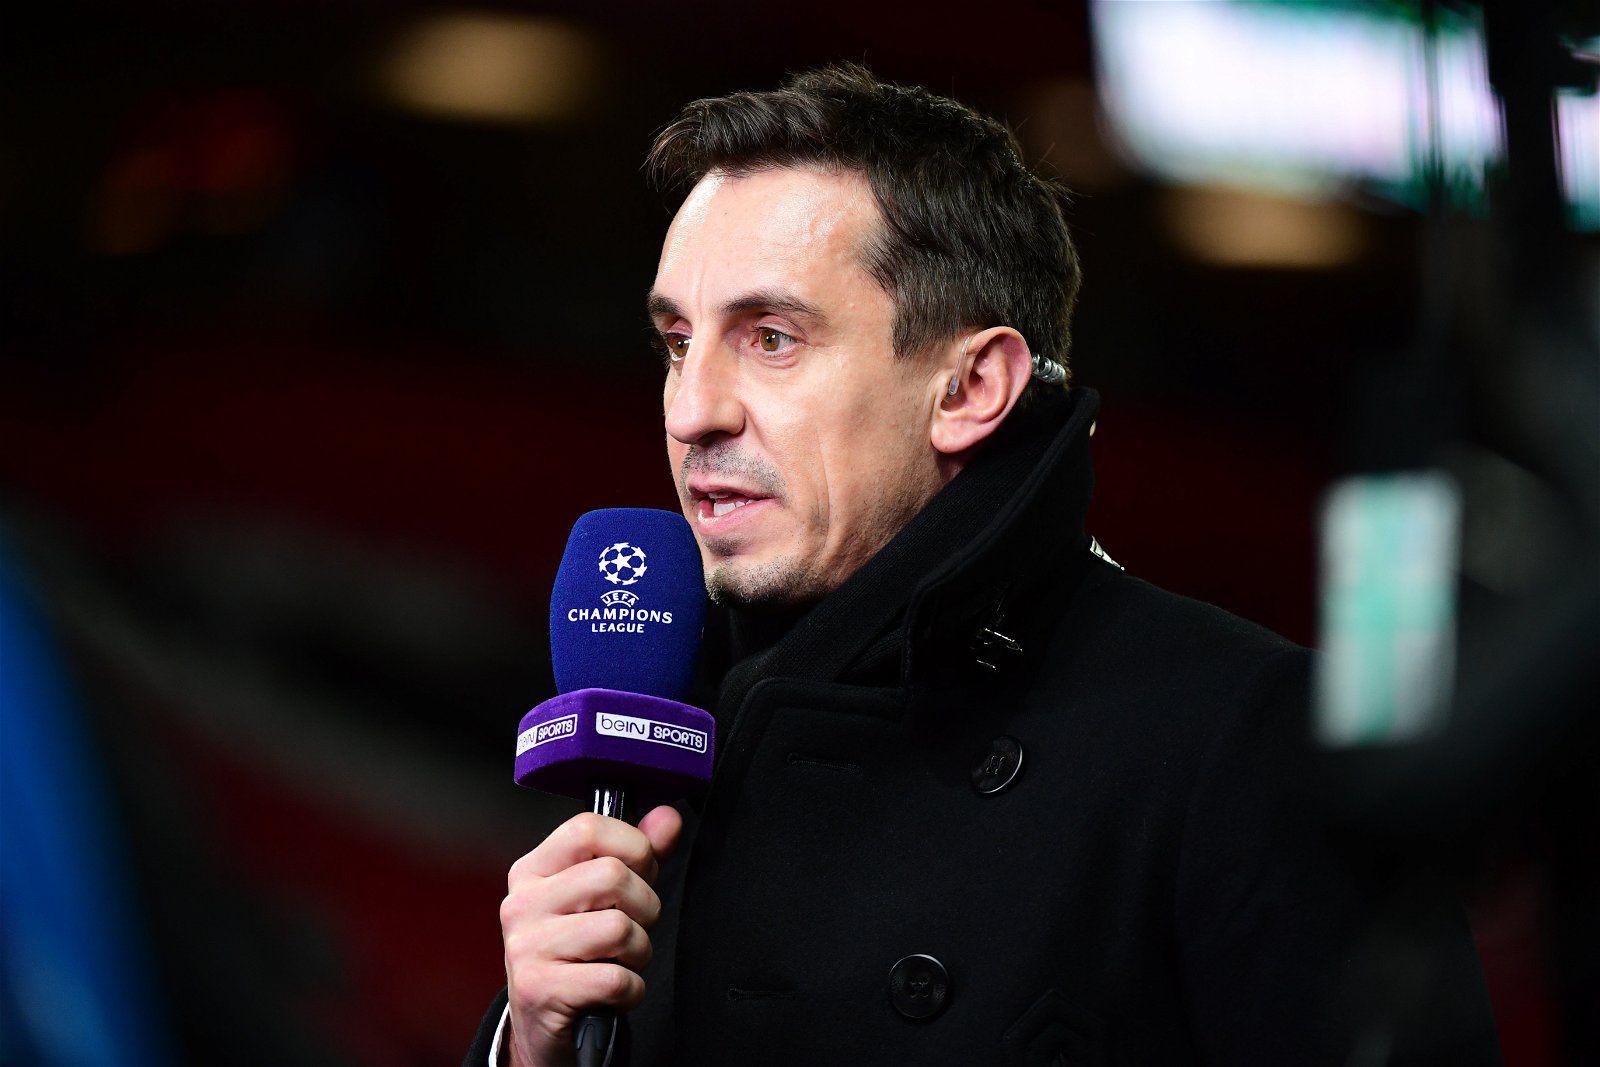 Gary Neville compares United's youngsters to the Class of 92